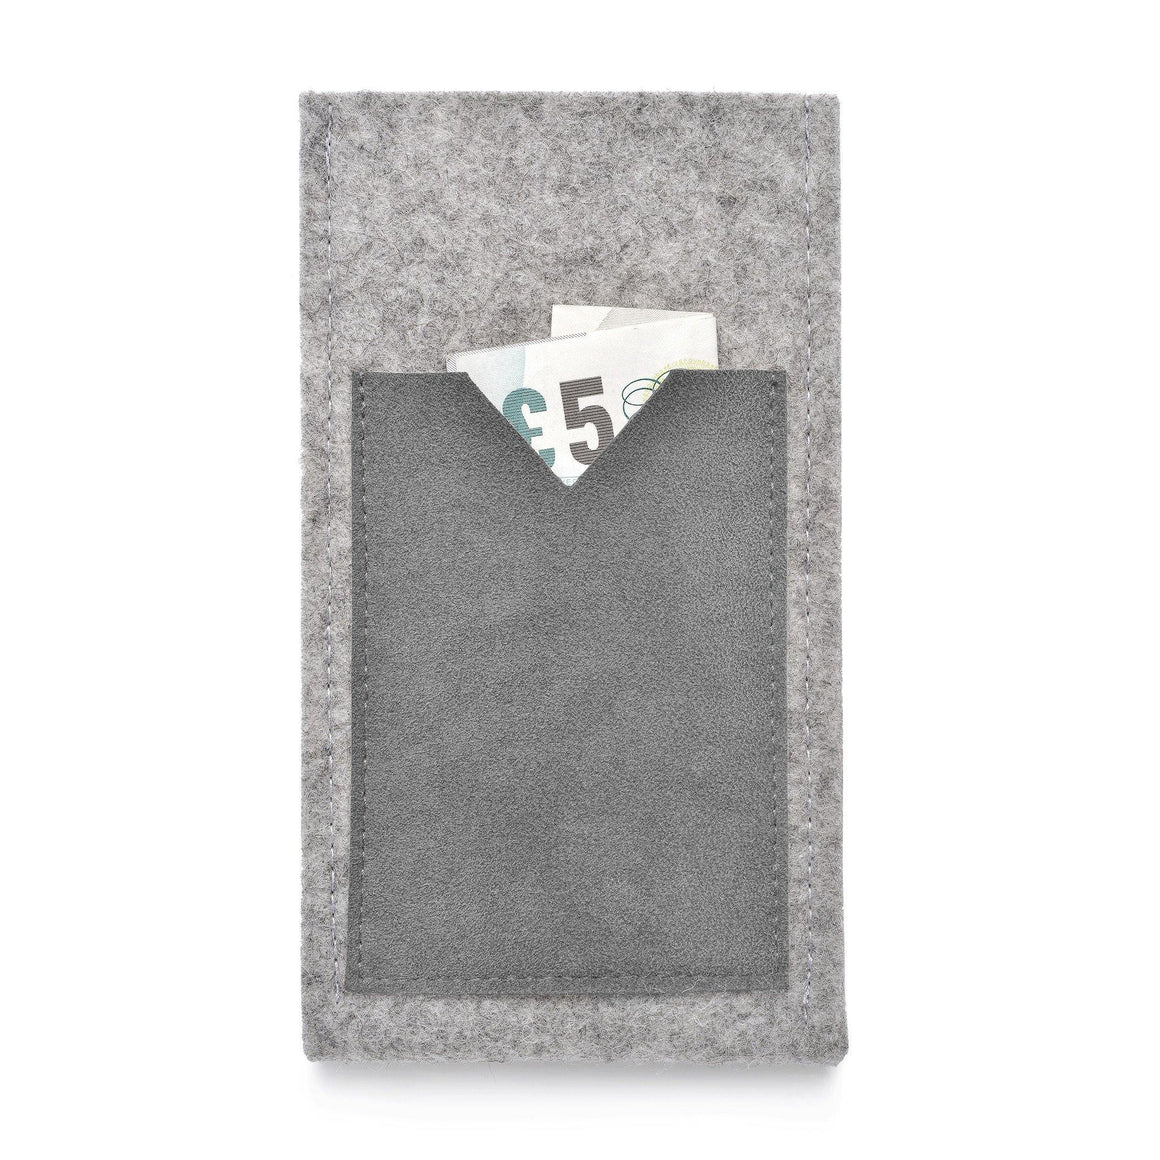 iPhone Wool Felt Cover Grey/Grey - Wrappers UK